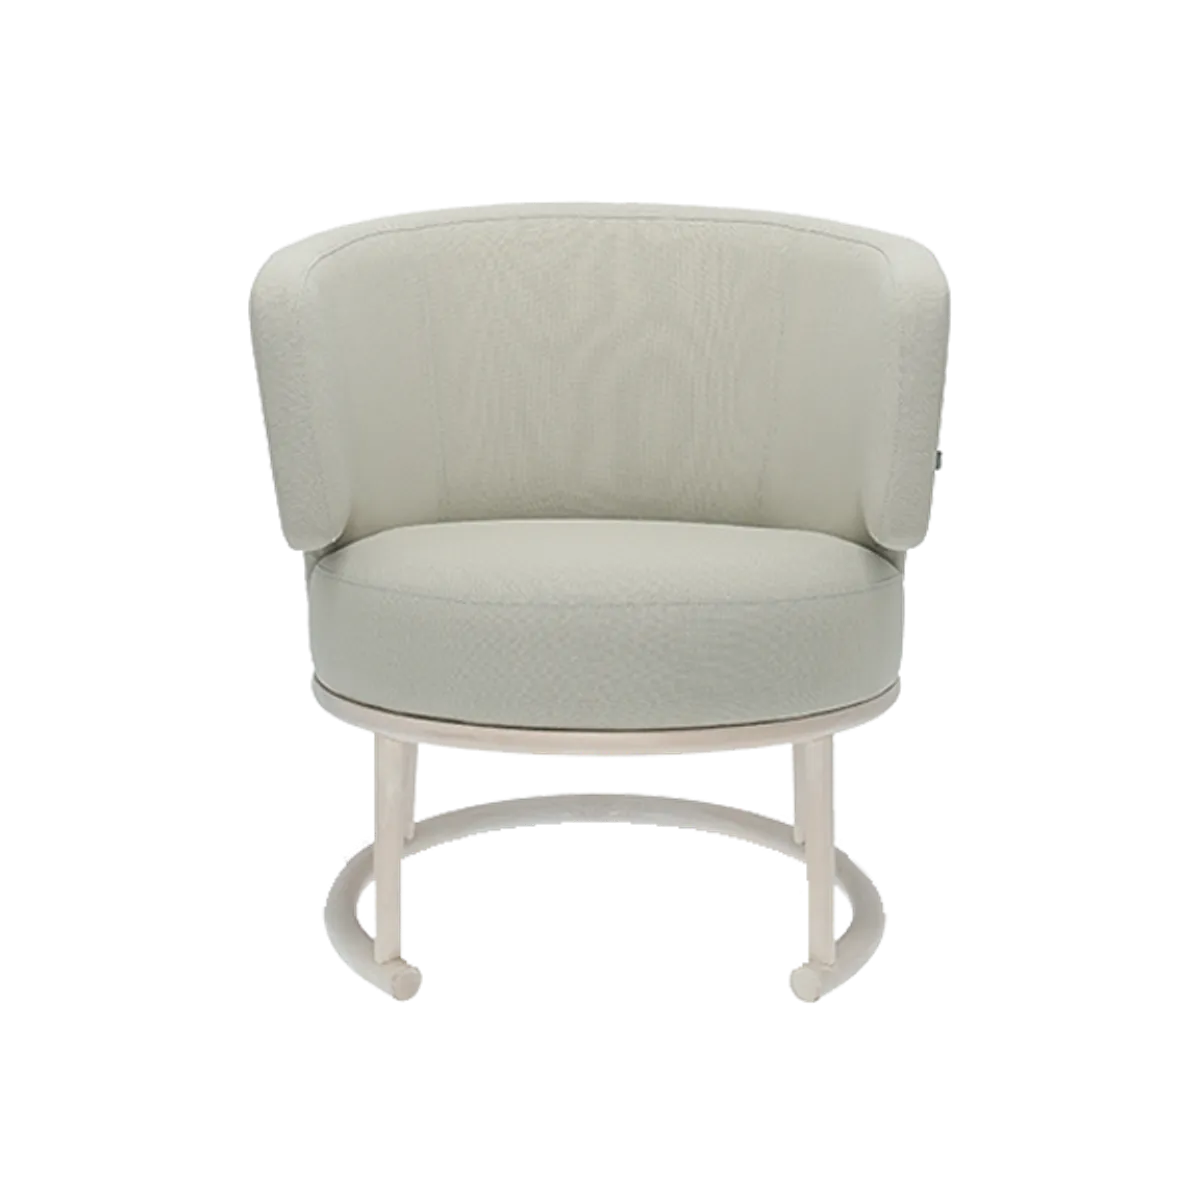 Web Bakerloo Lounge Chair Contemporary Hotel Furniture By Insideoutcontracts 024